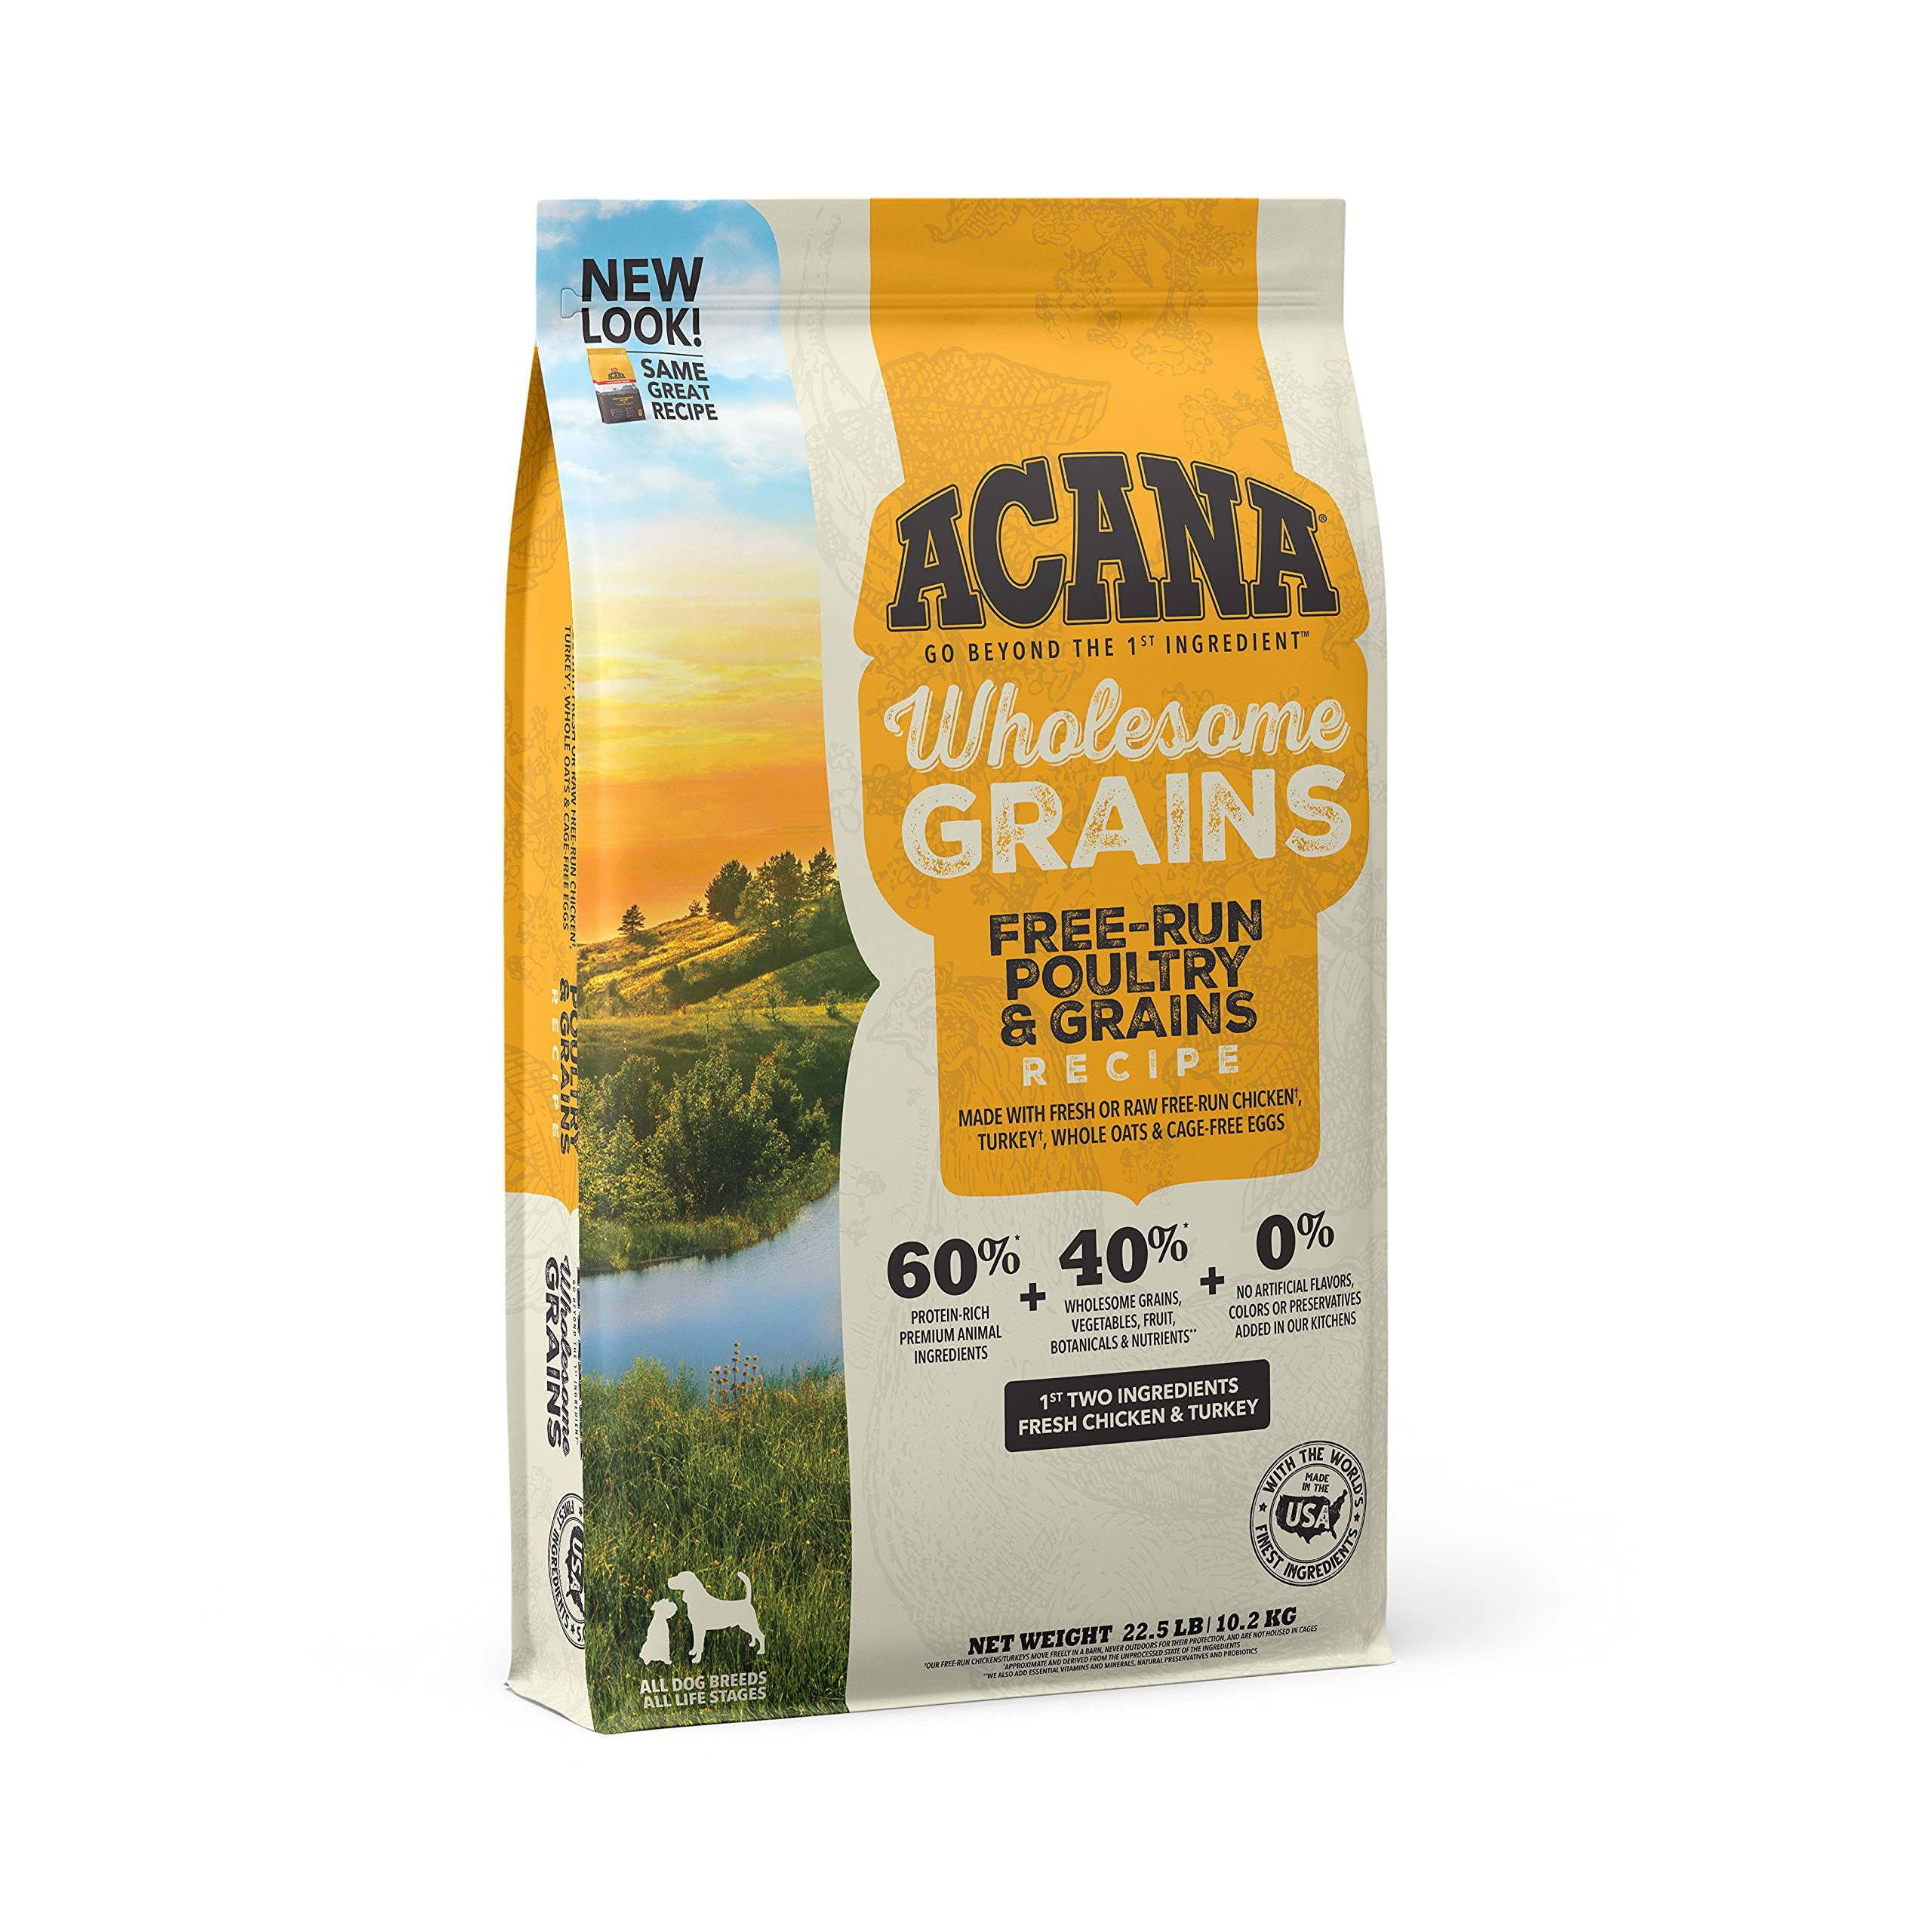 ACANA - Free-Run Poultry Wholesome Grains Recipe Dry Dog Food 22.5 lb